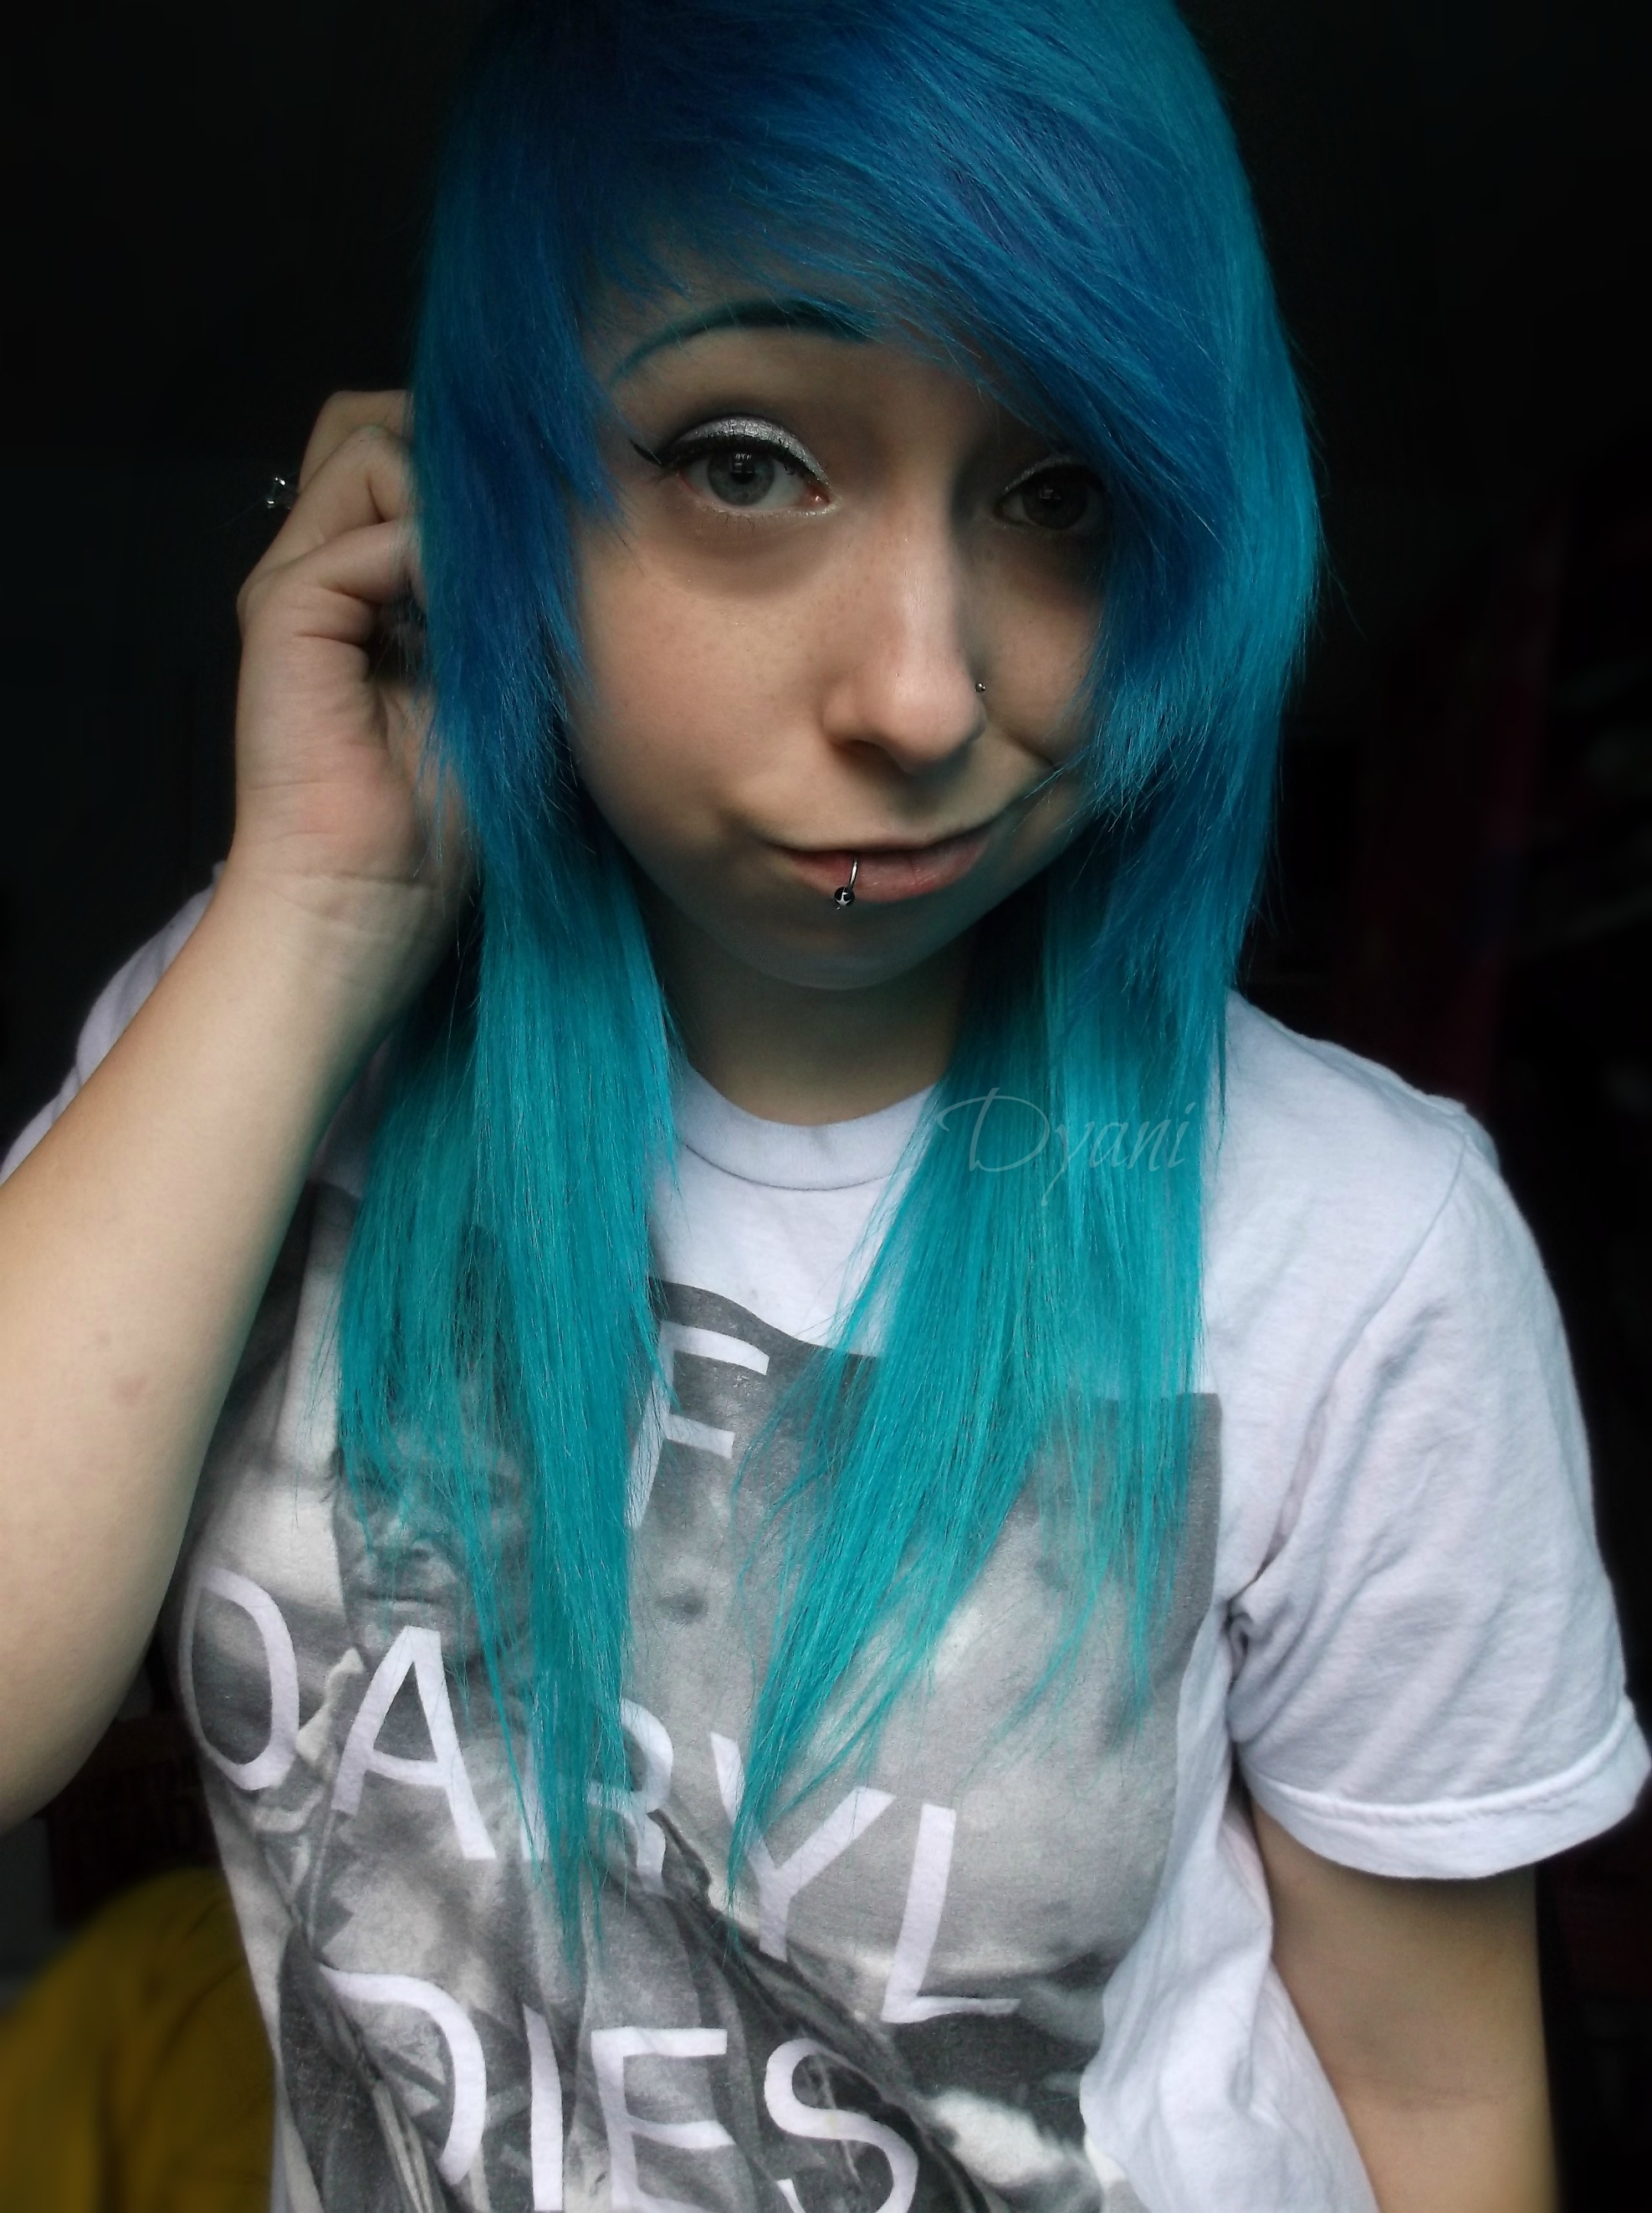 The blue haired girl